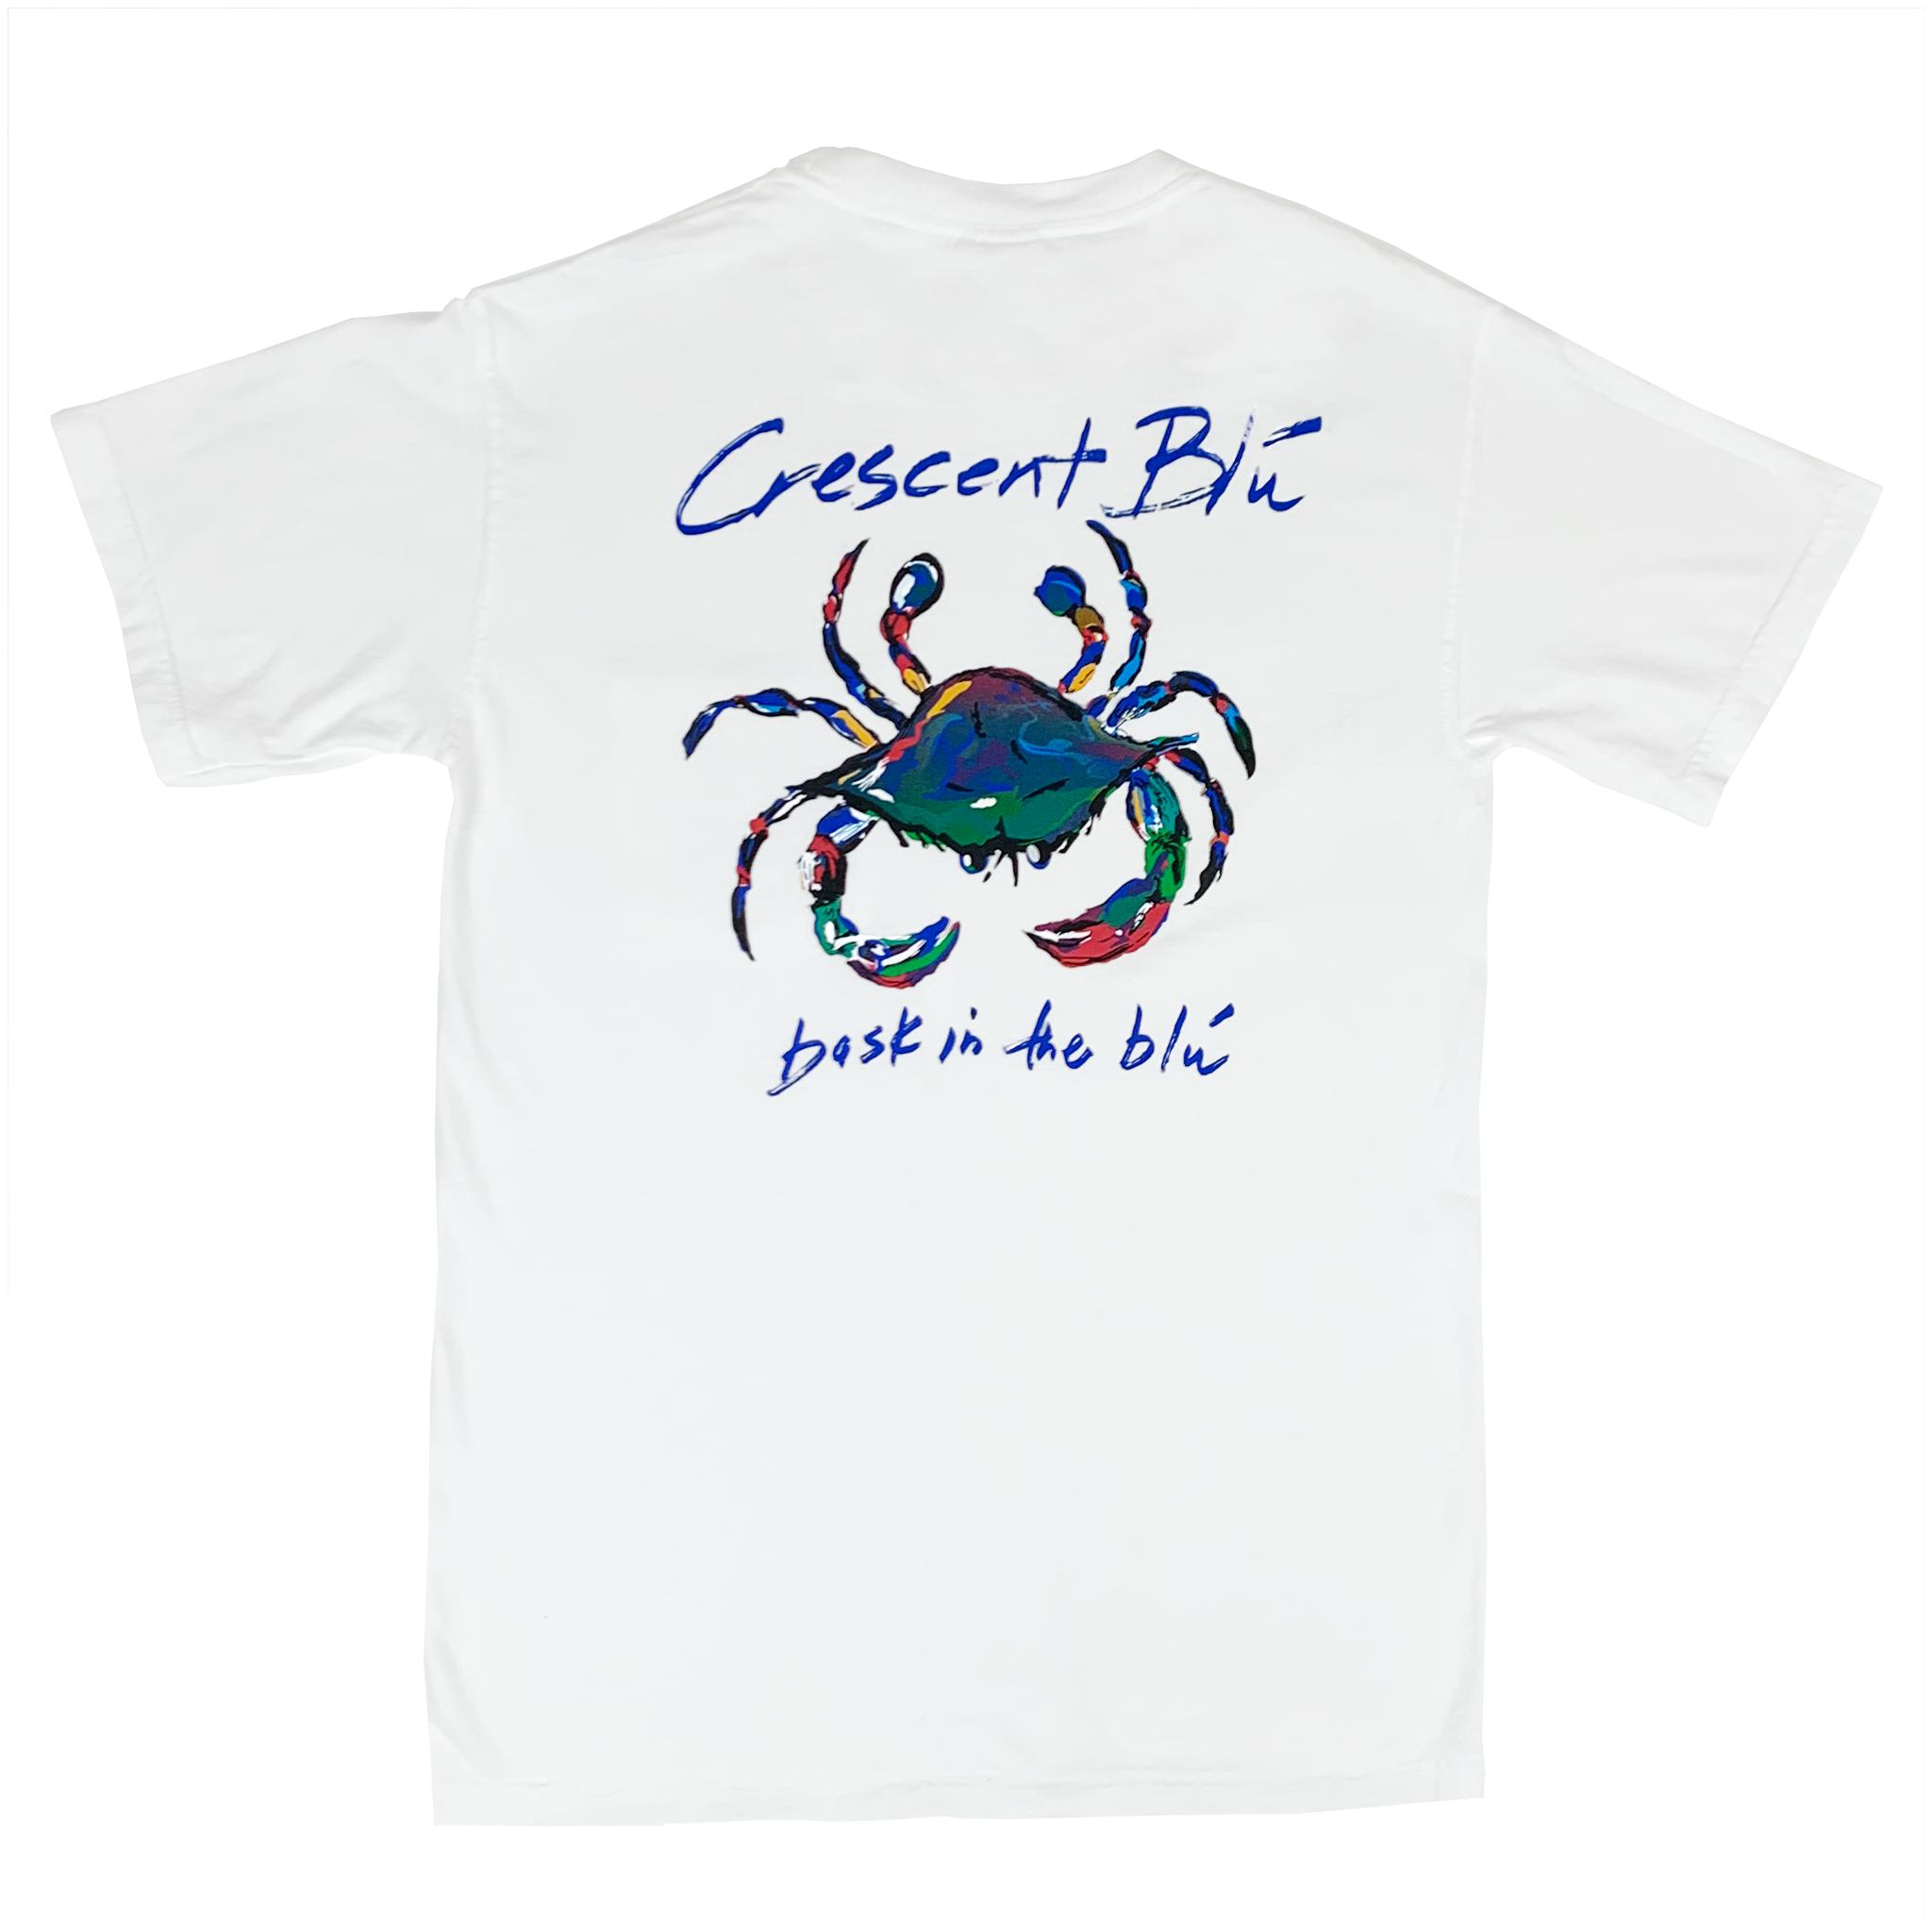 Back of a white Crescent Blu Tee with large multi-colored crab in center and Crescent Blu, Bask in the Blu printed above and below the crab image